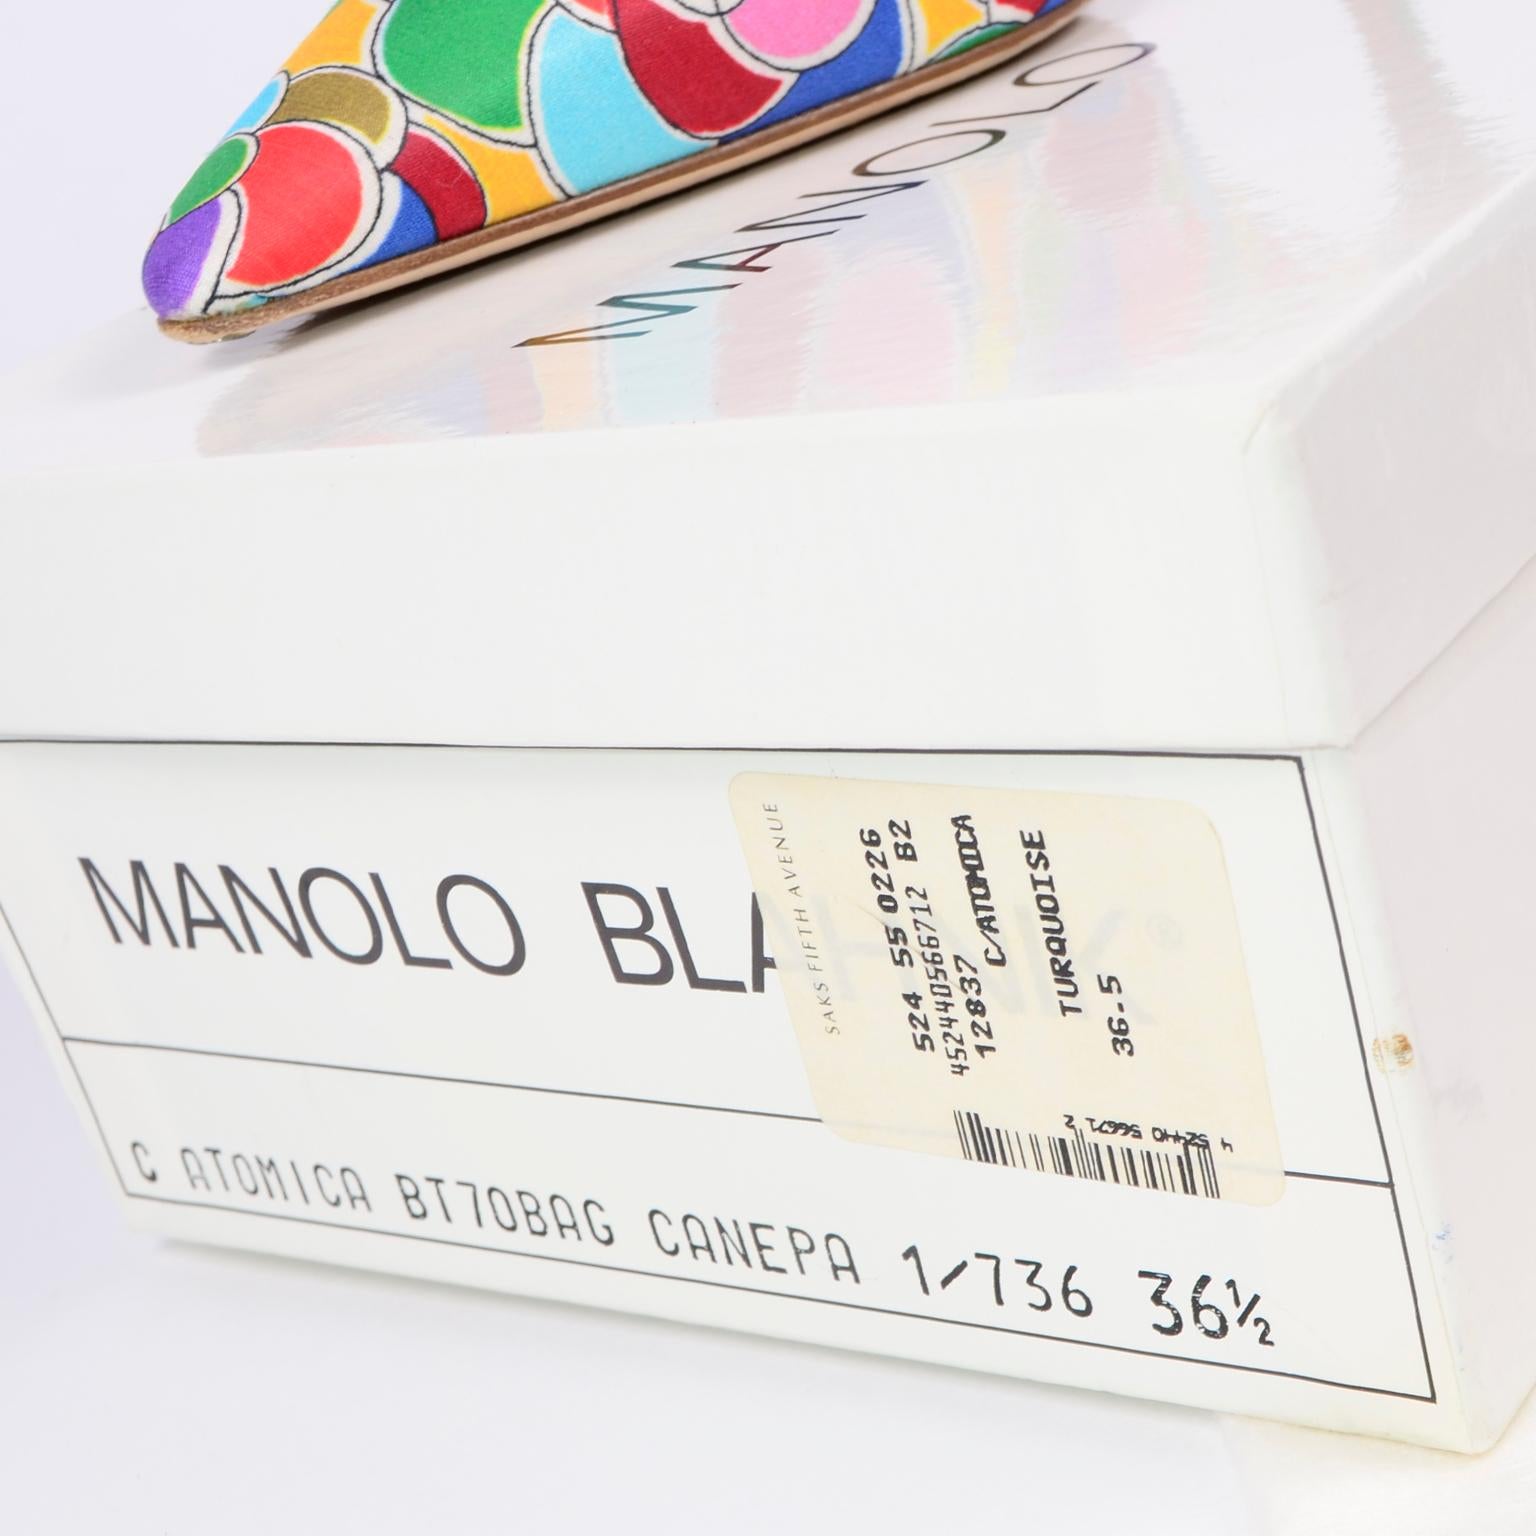 Manolo Blahnik Atomica Colorful Heeled Mules w/ Turquoise Buckle Size 36 1/2 For Sale 5